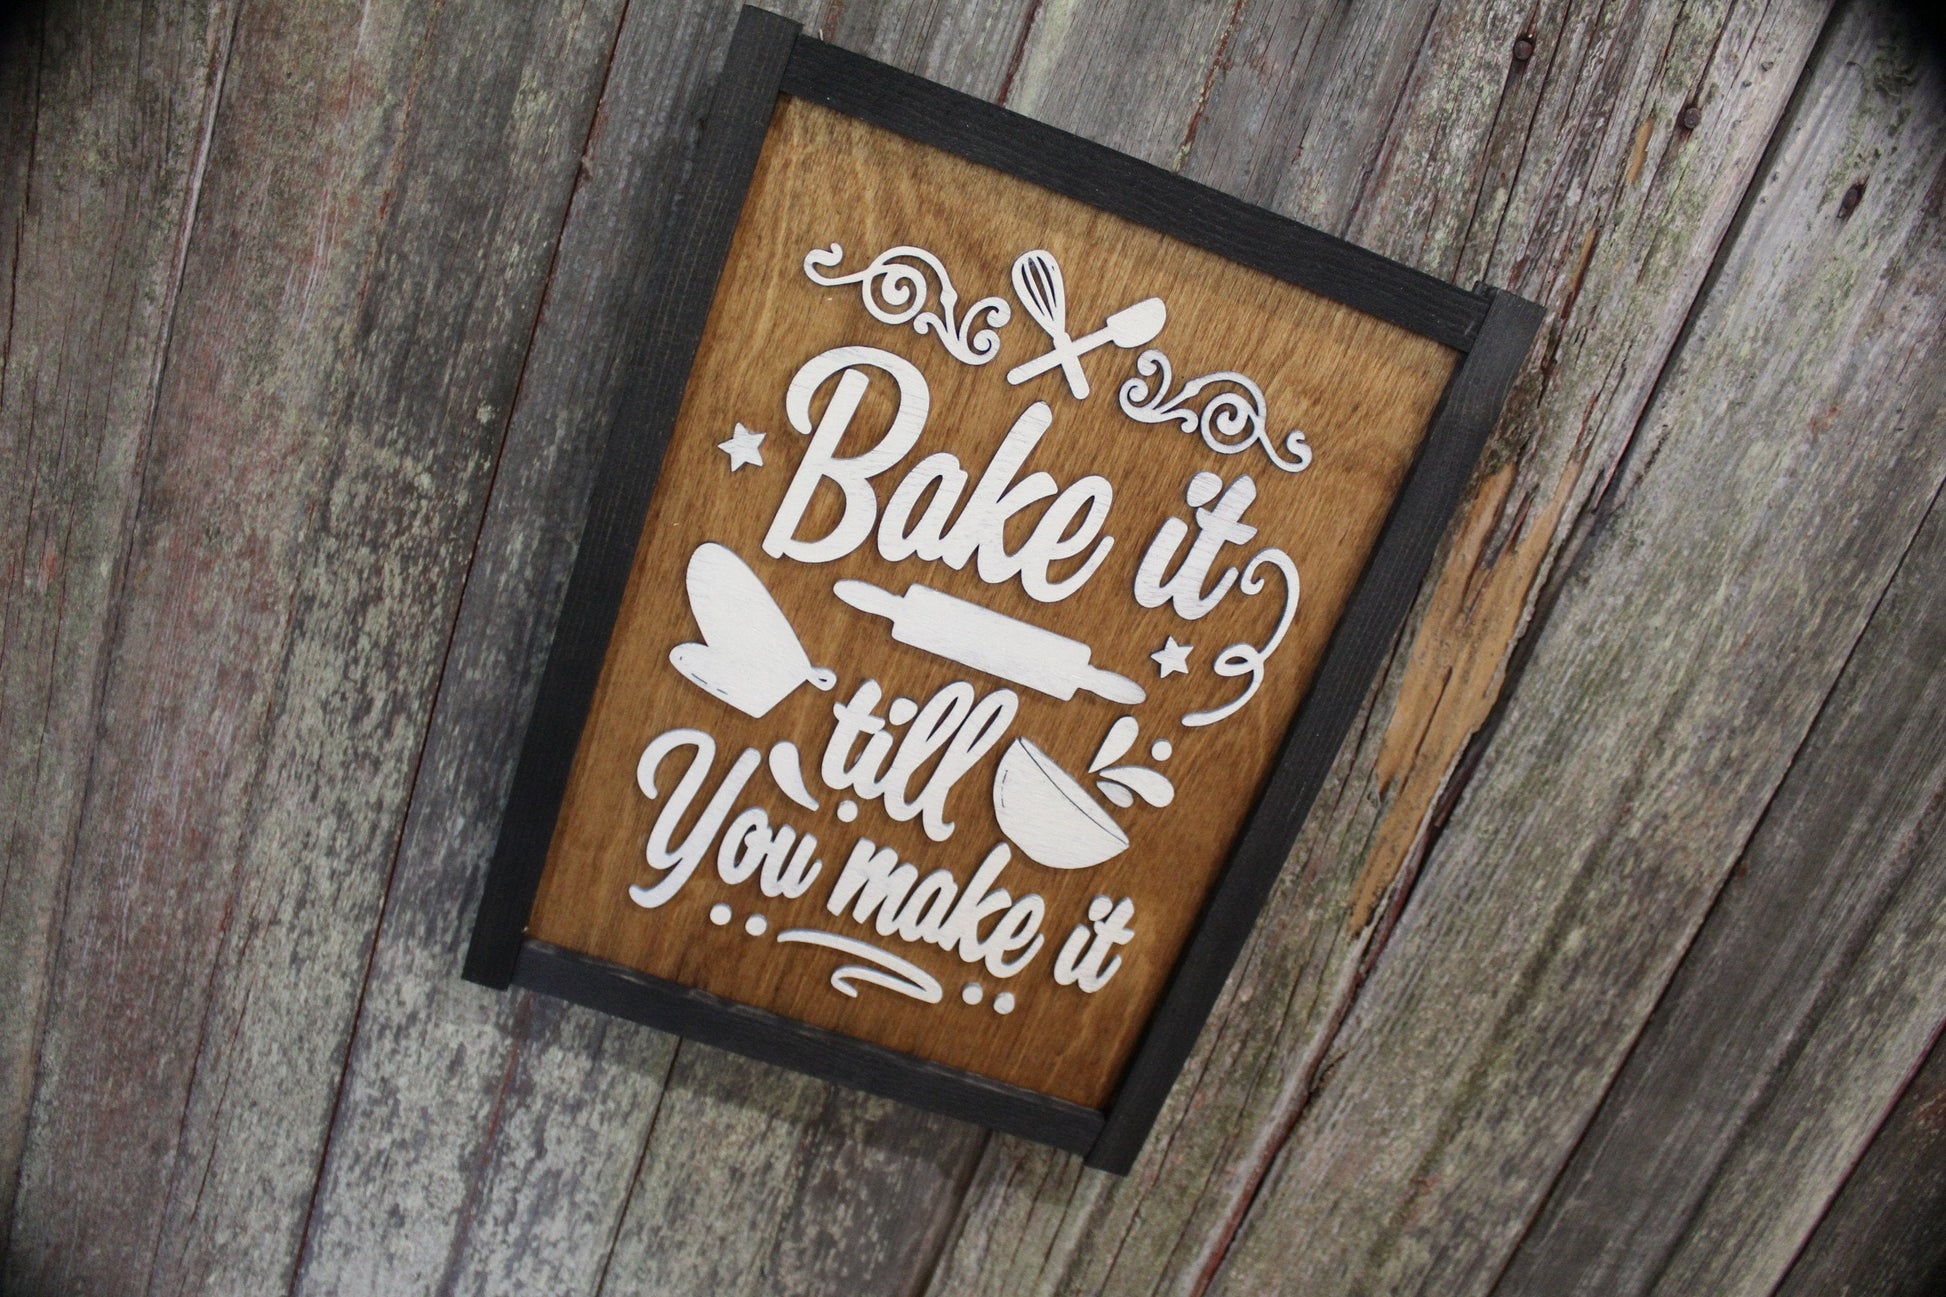 Bake It Till You Make It Kitchen Wall Sign 3D Raised Text Décor Decoration Art Bowl Mixer Framed Brown White Farmhouse Mitten Rolling Pin